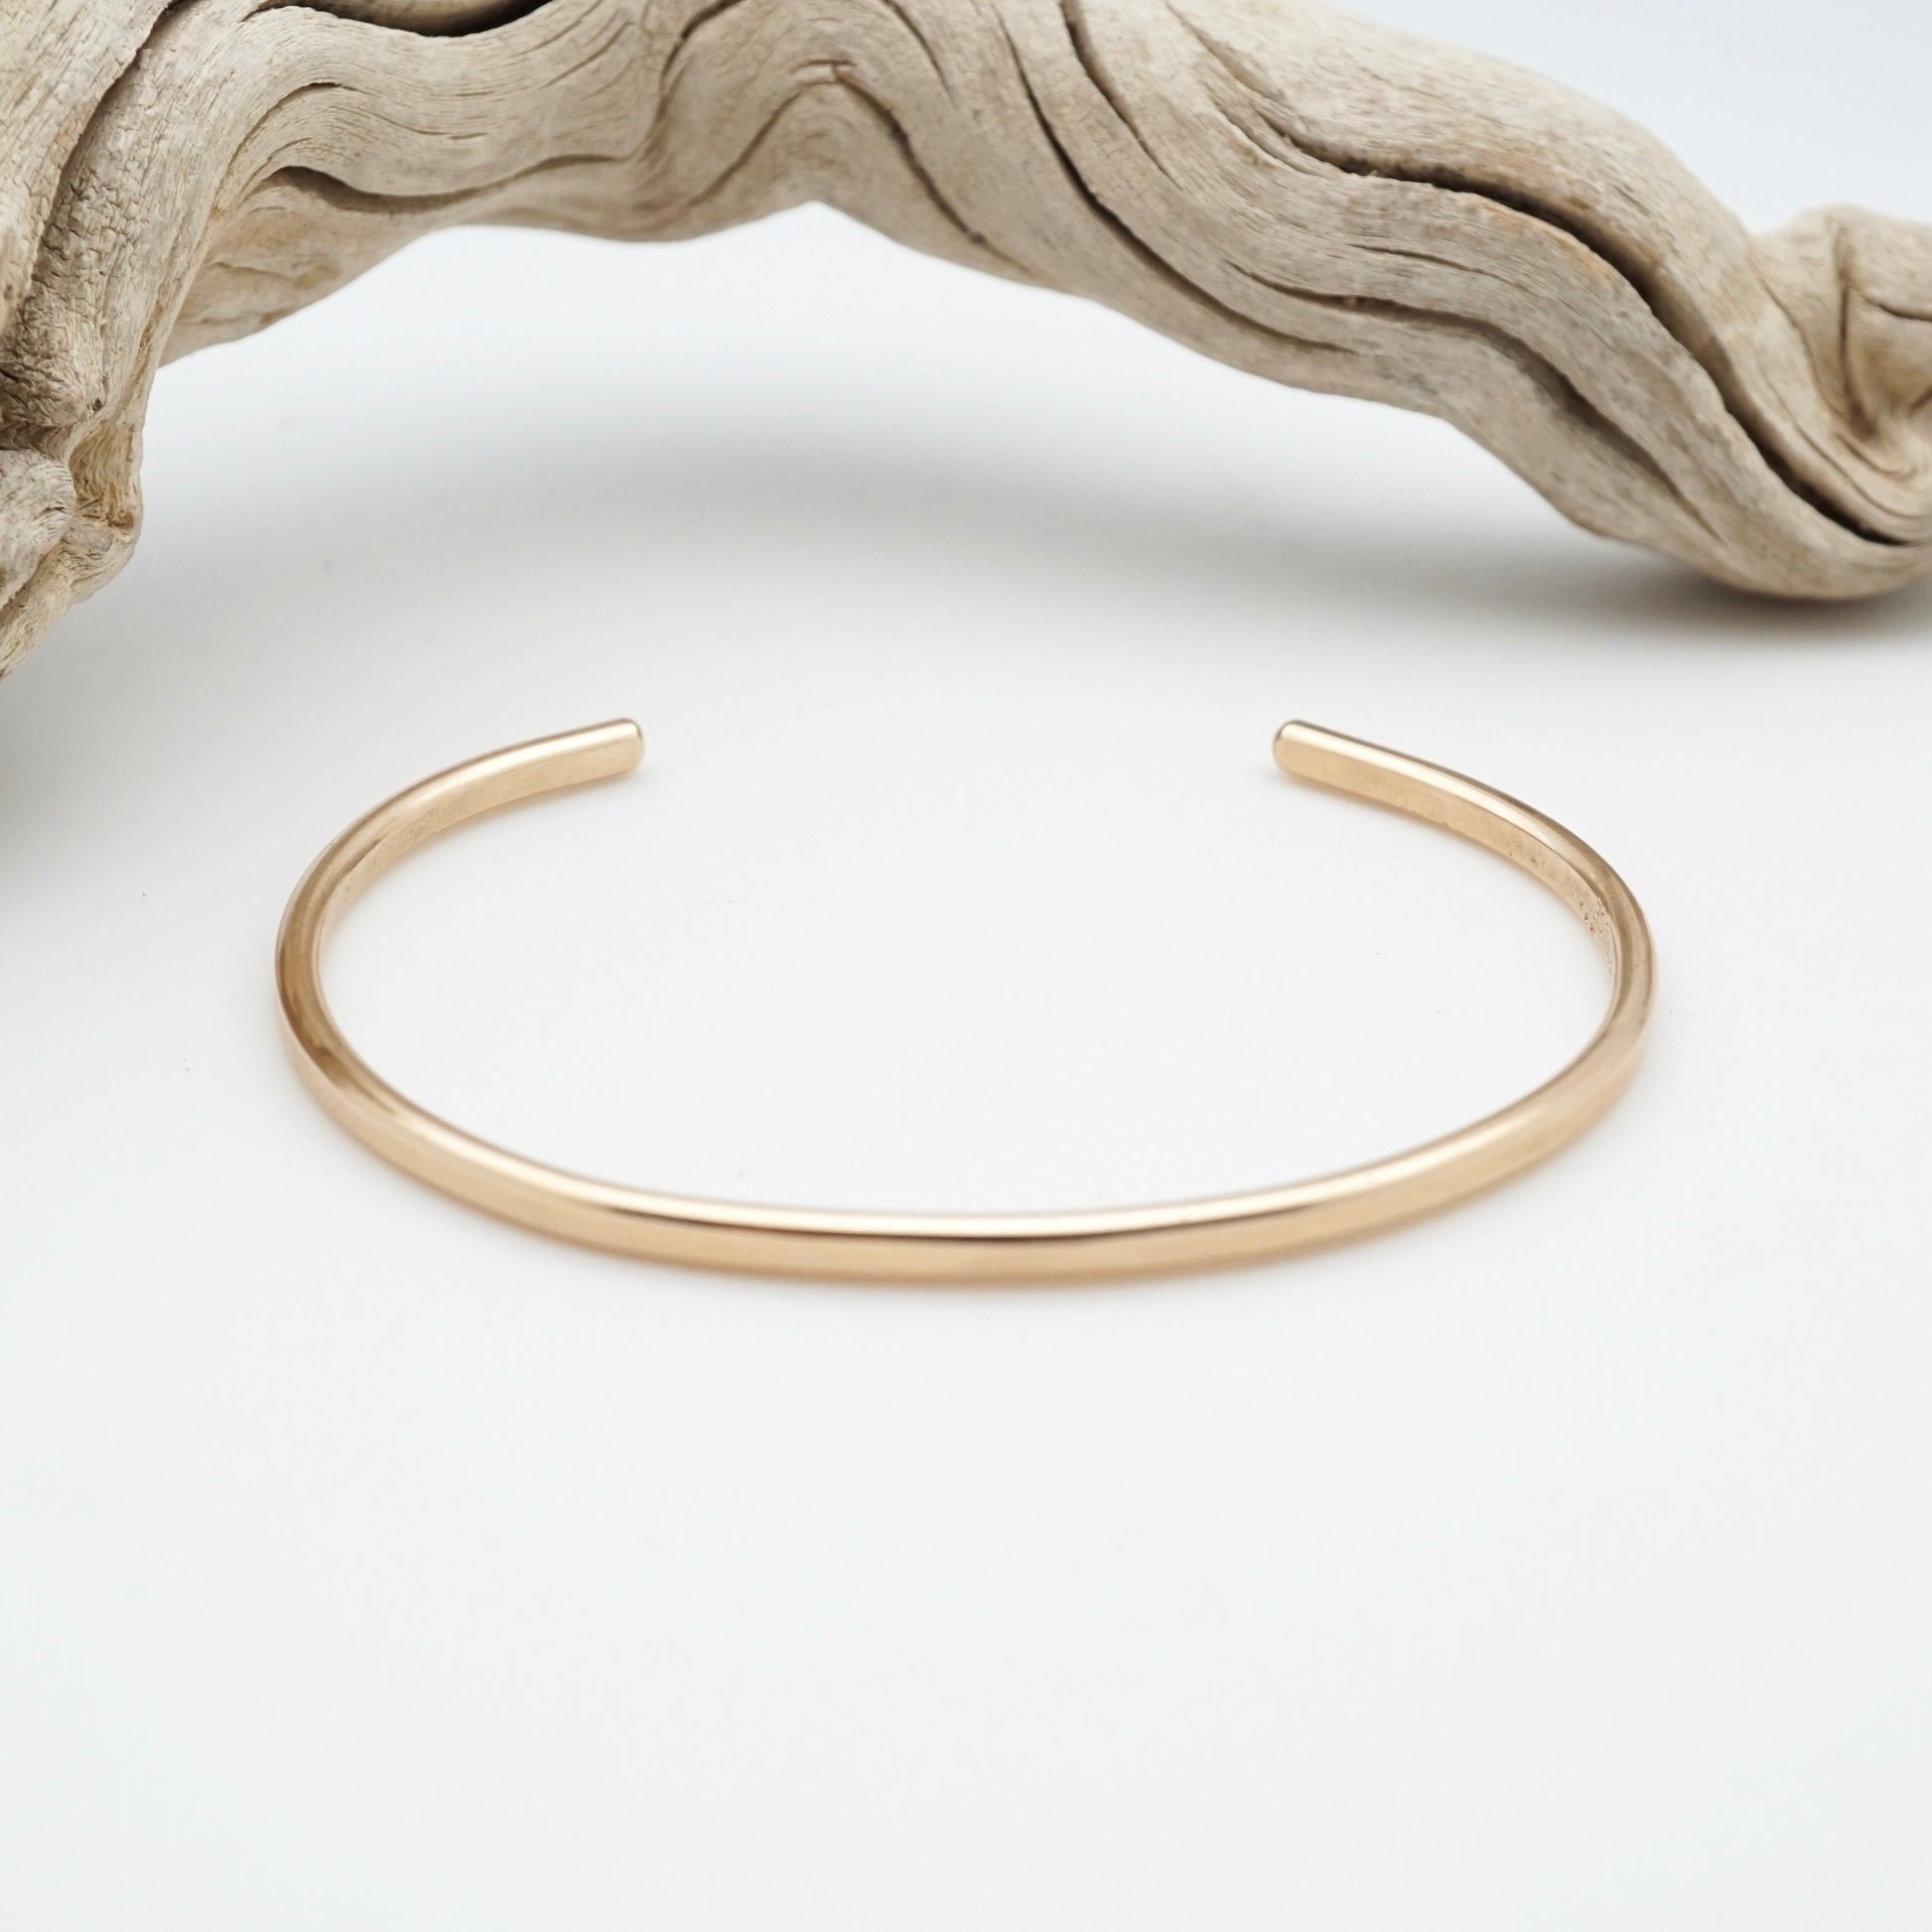 sturdy 14k goldfill cuff - two sizes available - Lumenrose